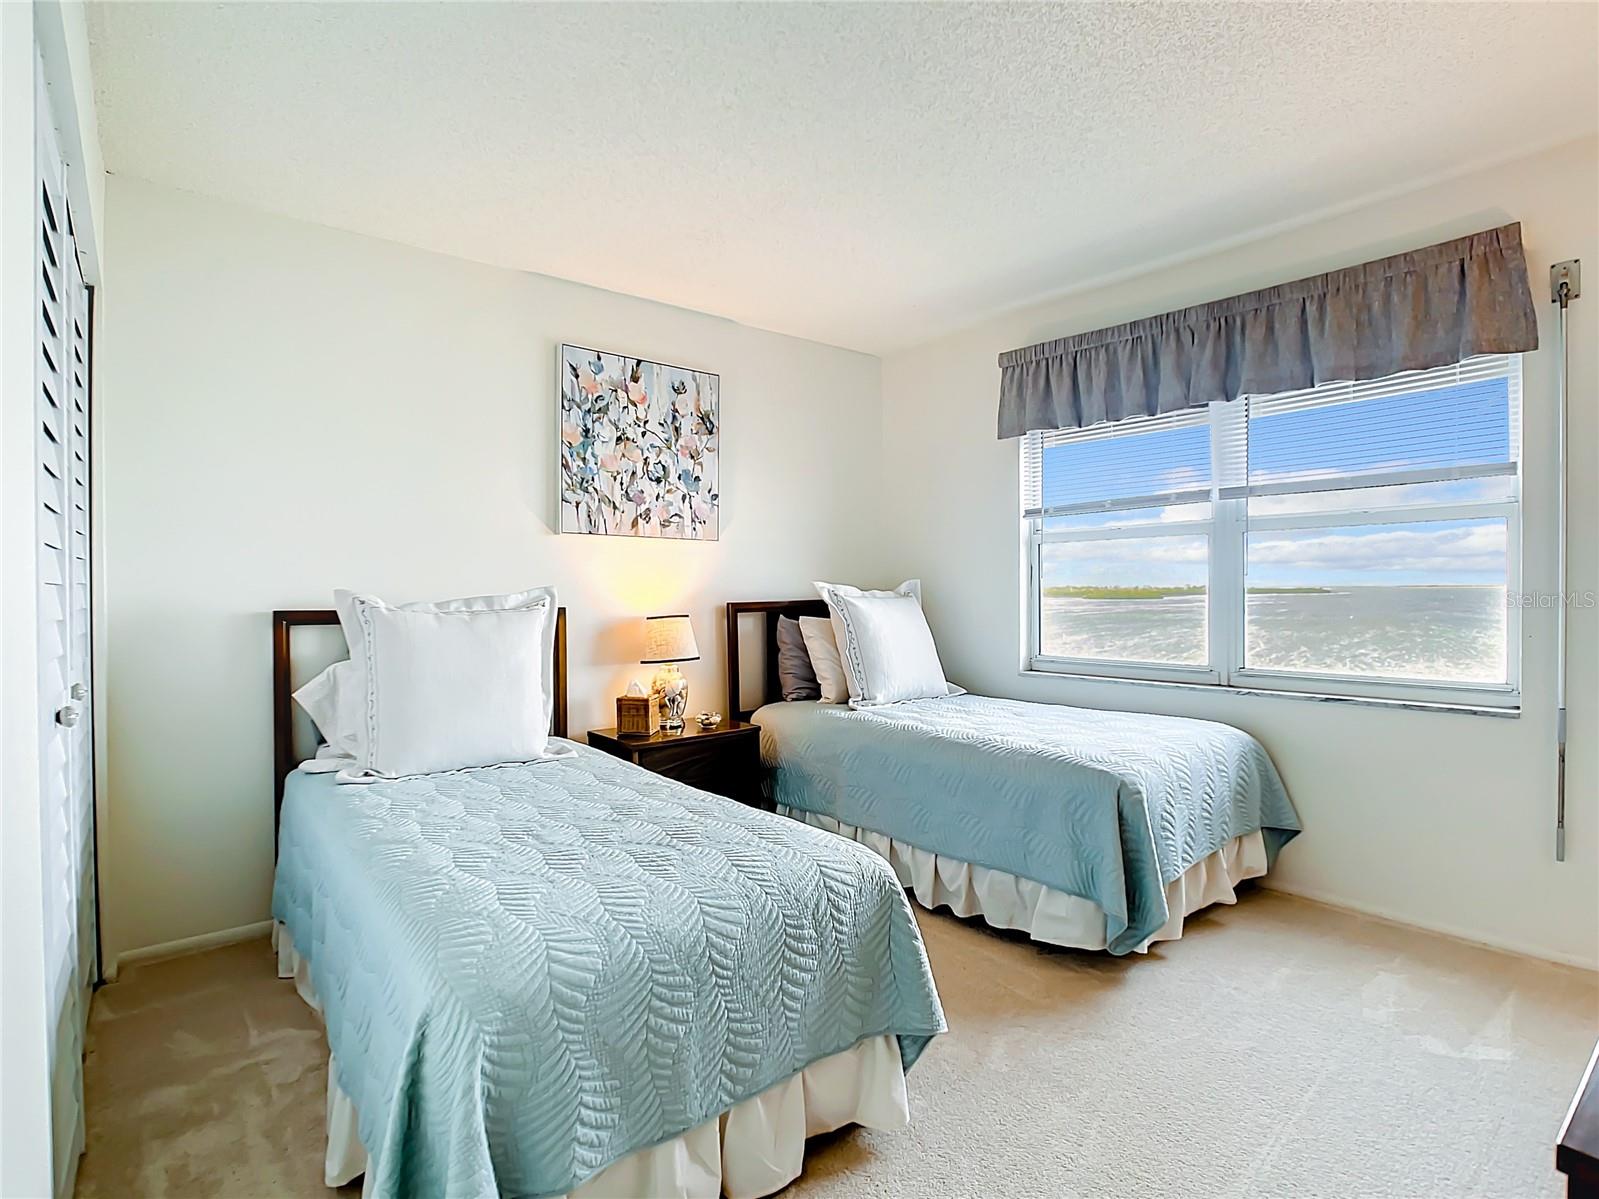 Second bedroom with views of St. Josephs Sound and N. Honeymoon